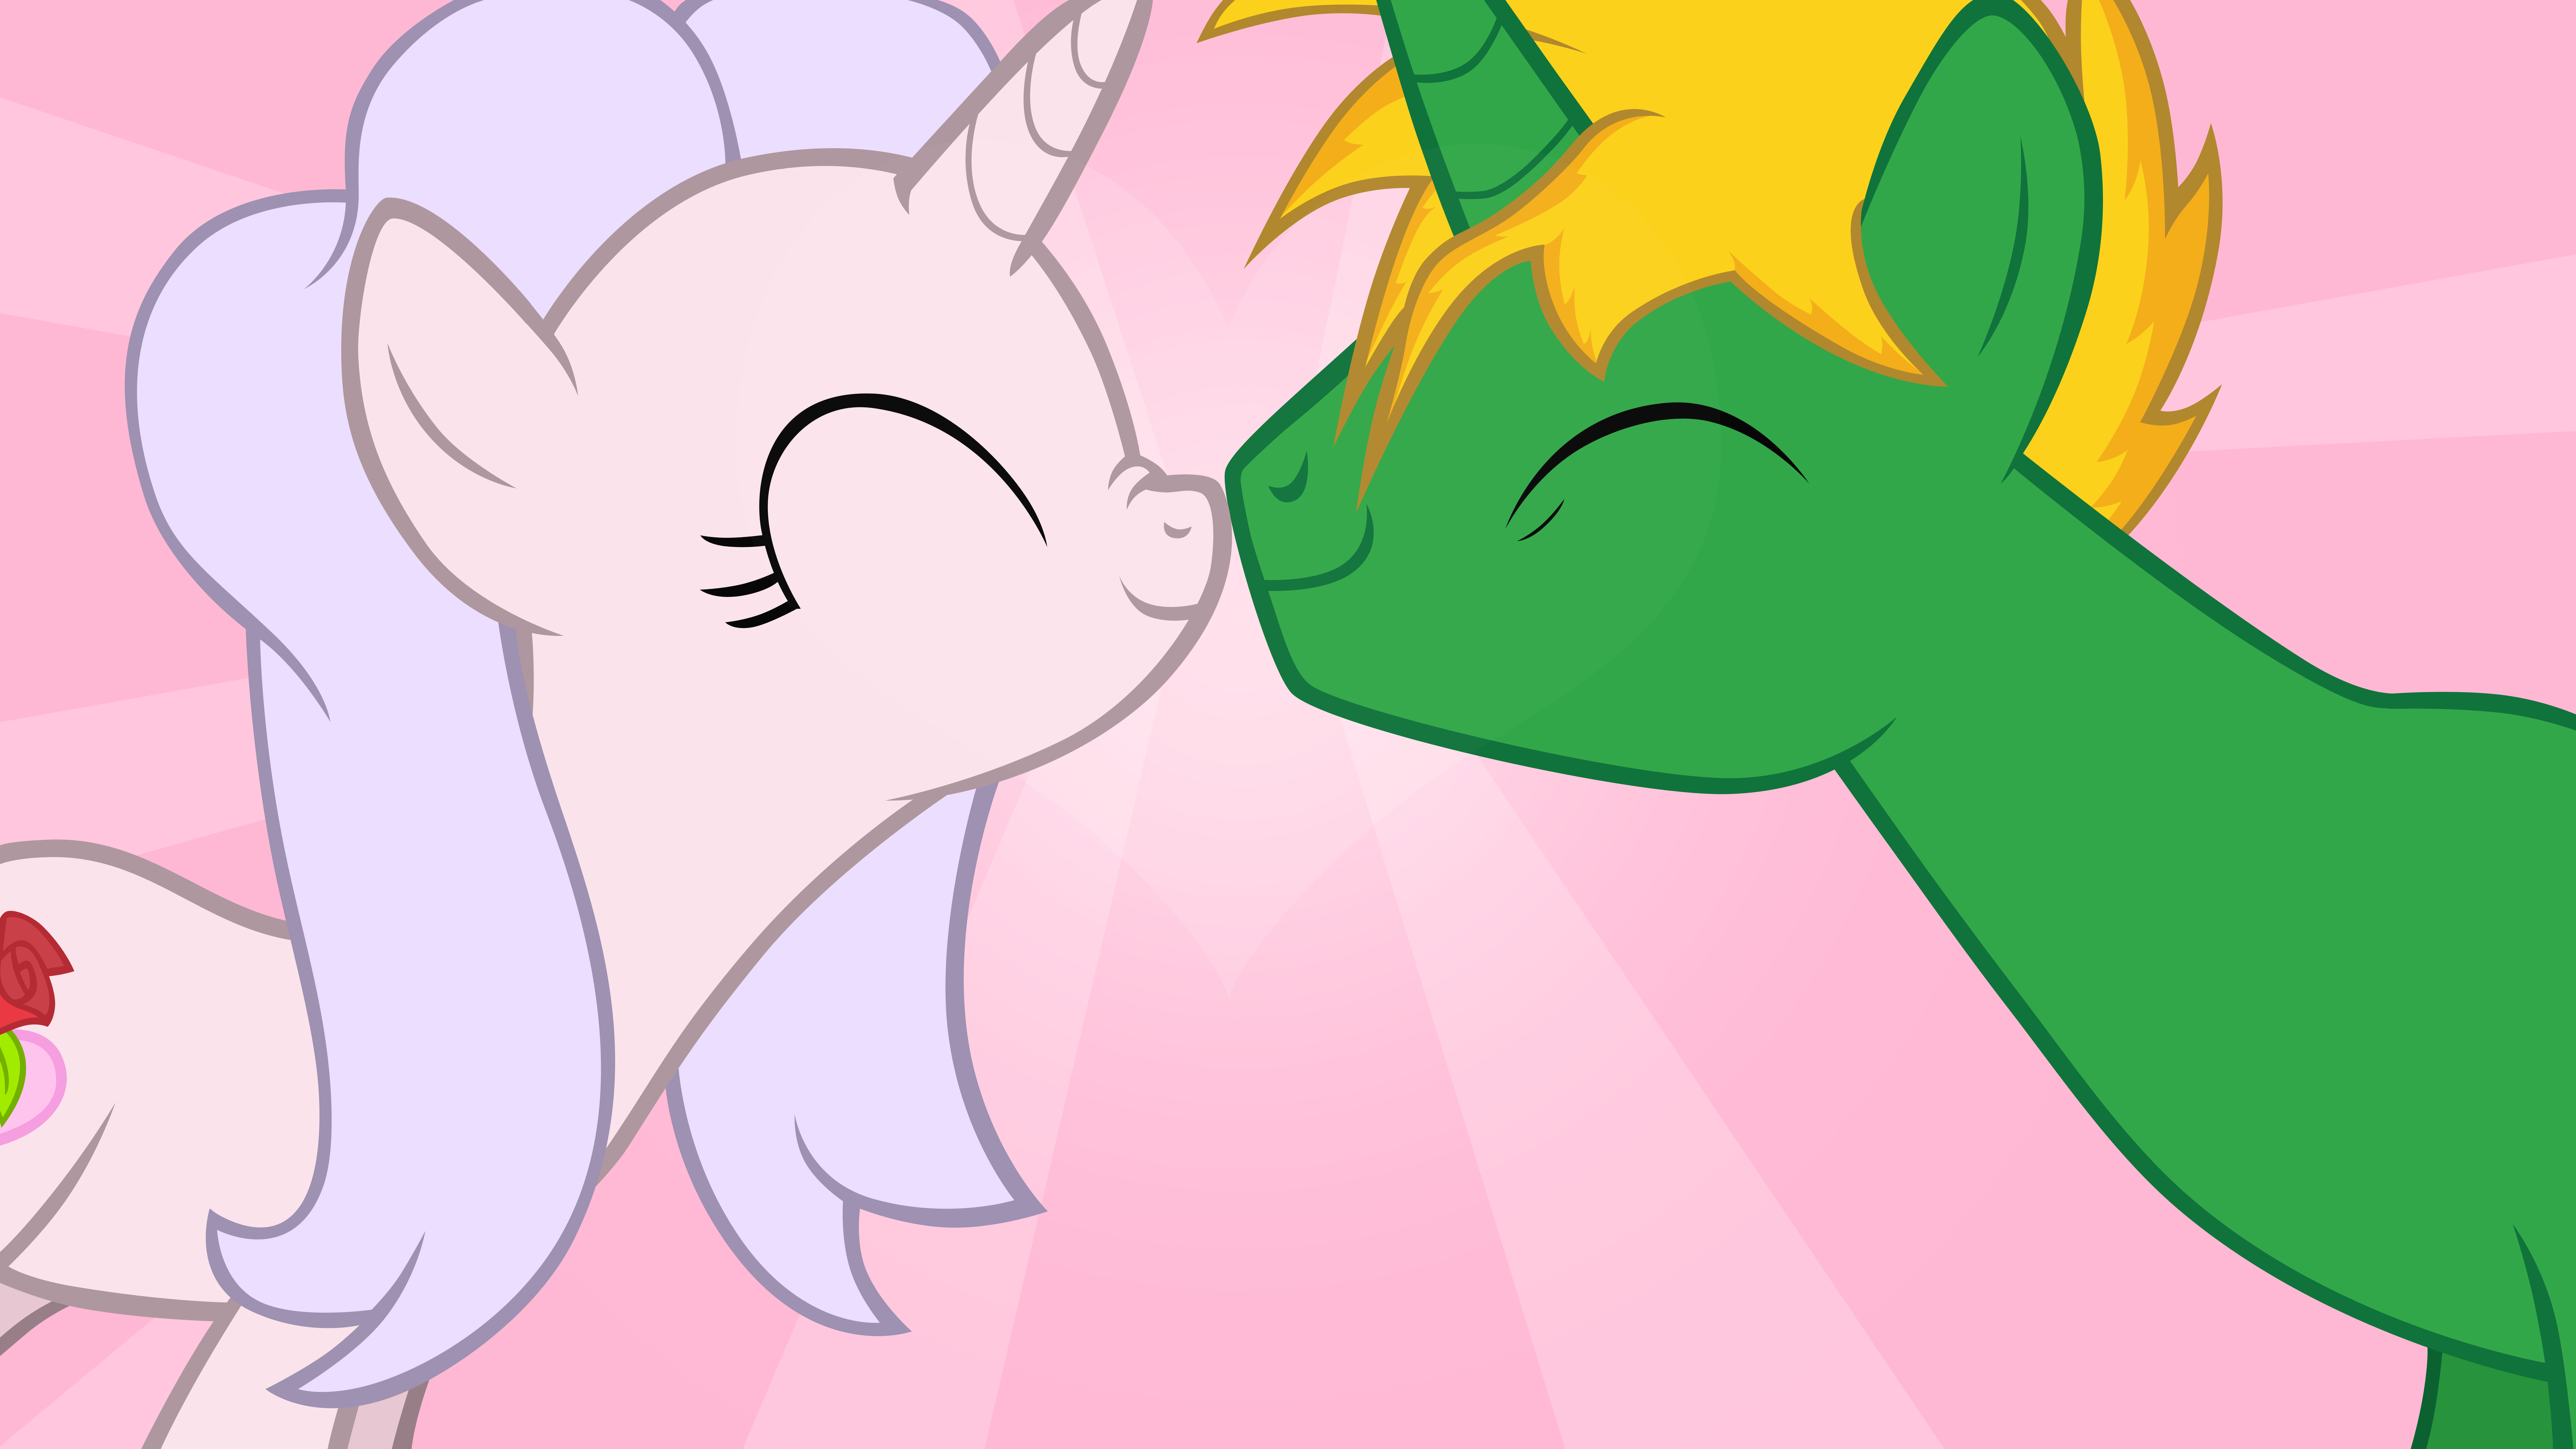 Rose Heart and Venus Wonder are "kissing" by Liggliluff